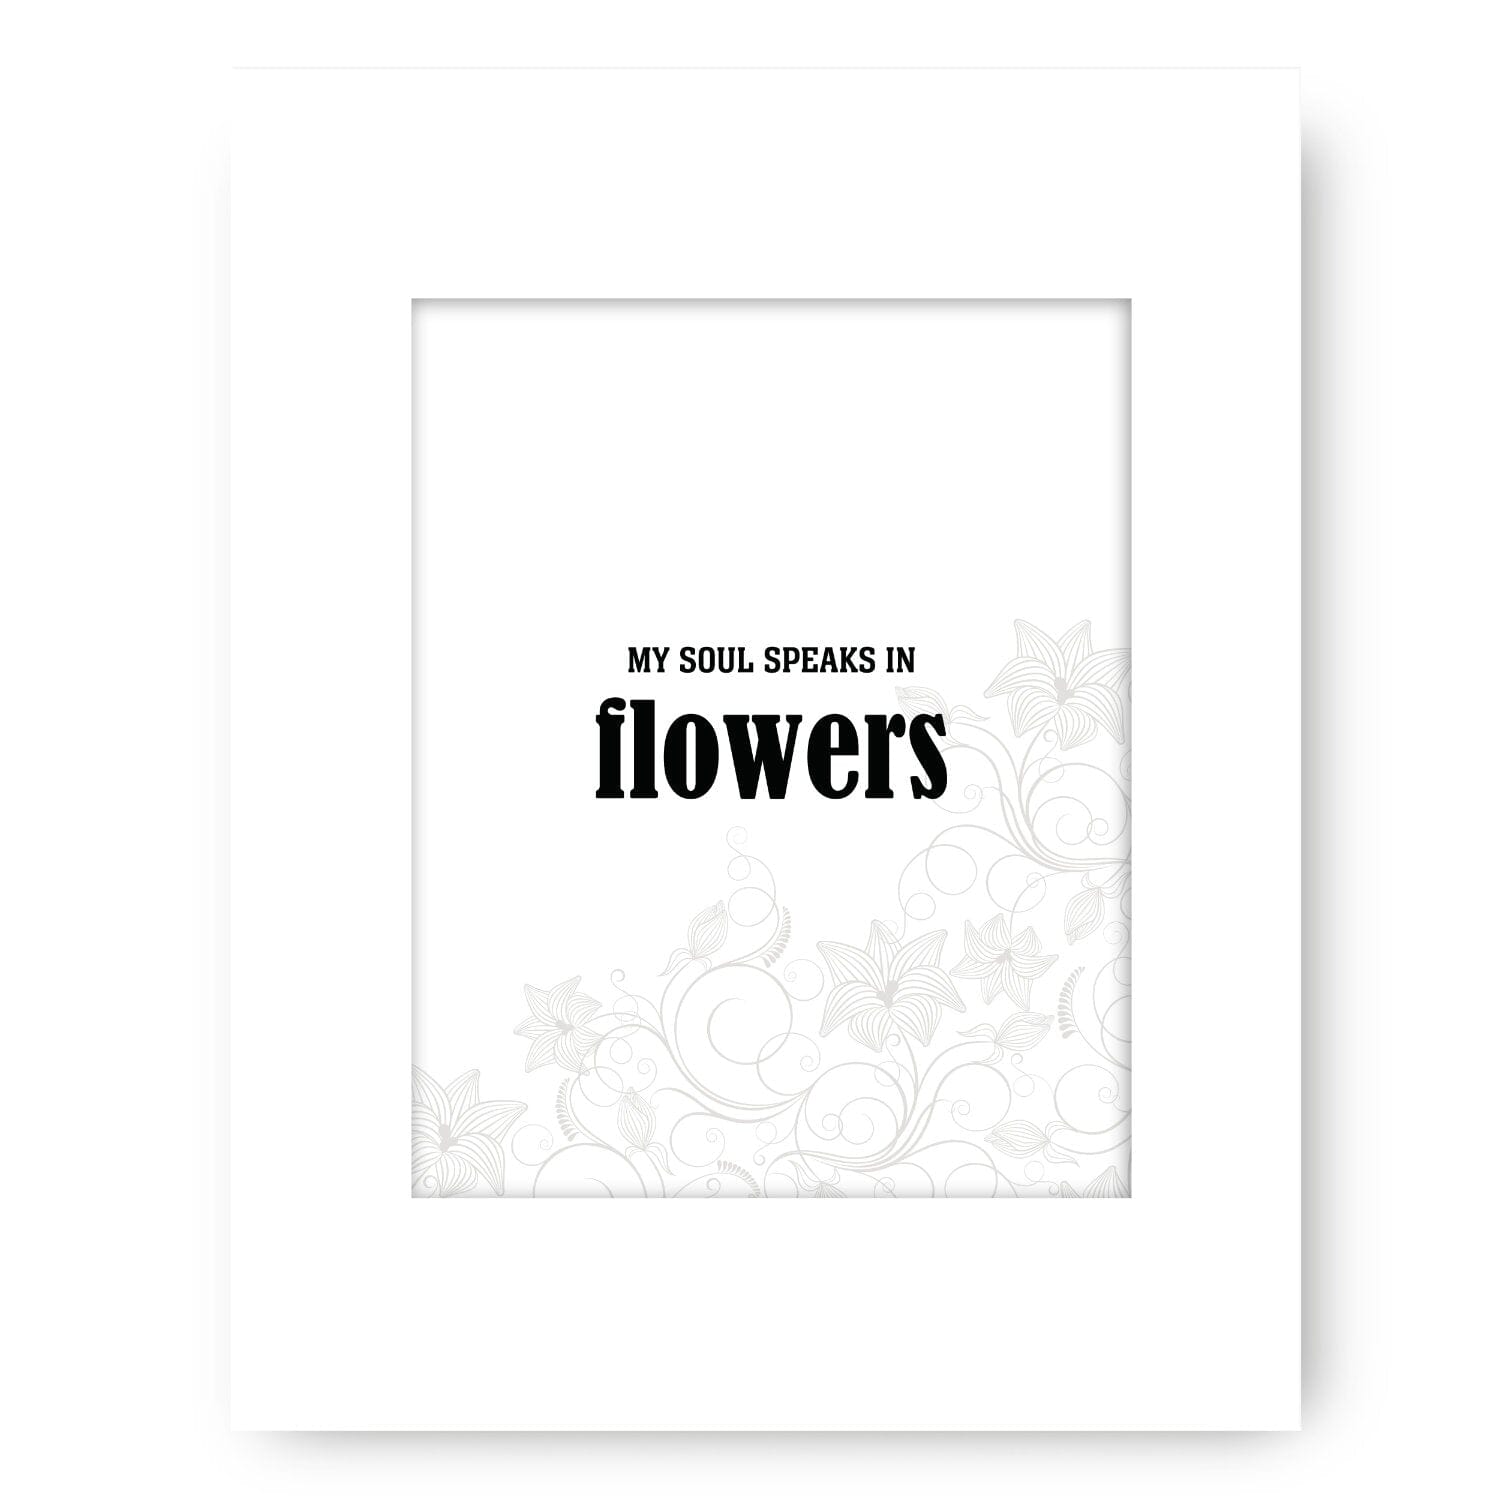 My Soul Speaks in Flowers - Wise and Witty Quote Wall Print Wise and Wiseass Quotes Song Lyrics Art 8x10 White Matted Print 